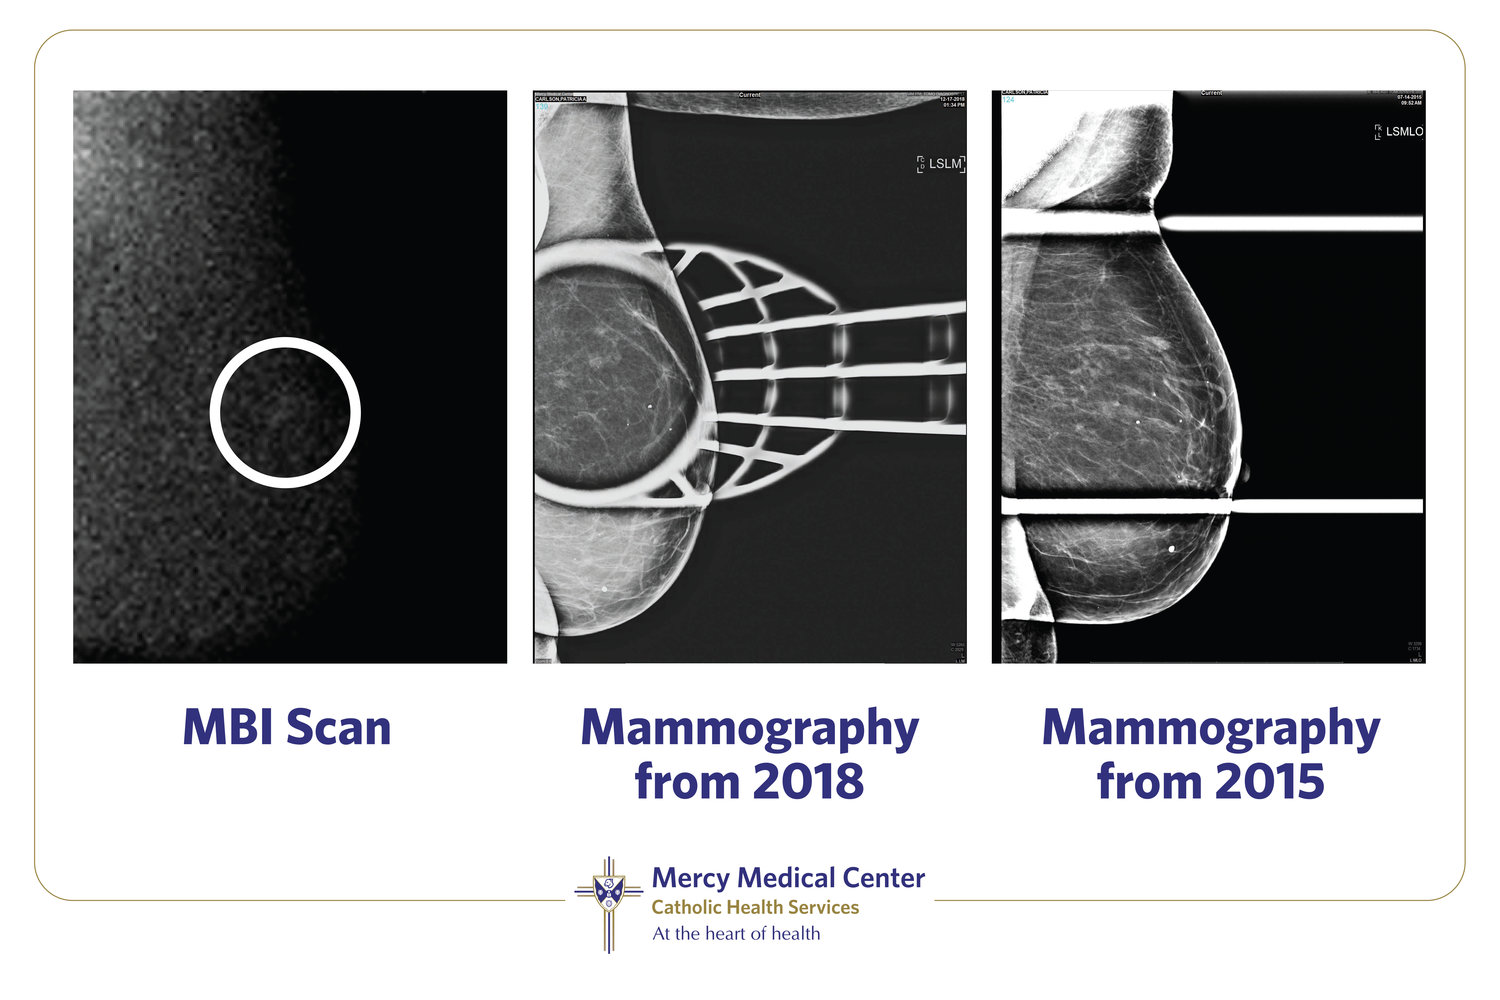 Mercy Medical Center displayed photos of Carlson’s previous mammography screenings beside her MBI, which shows its precision, compared to traditional technologies.